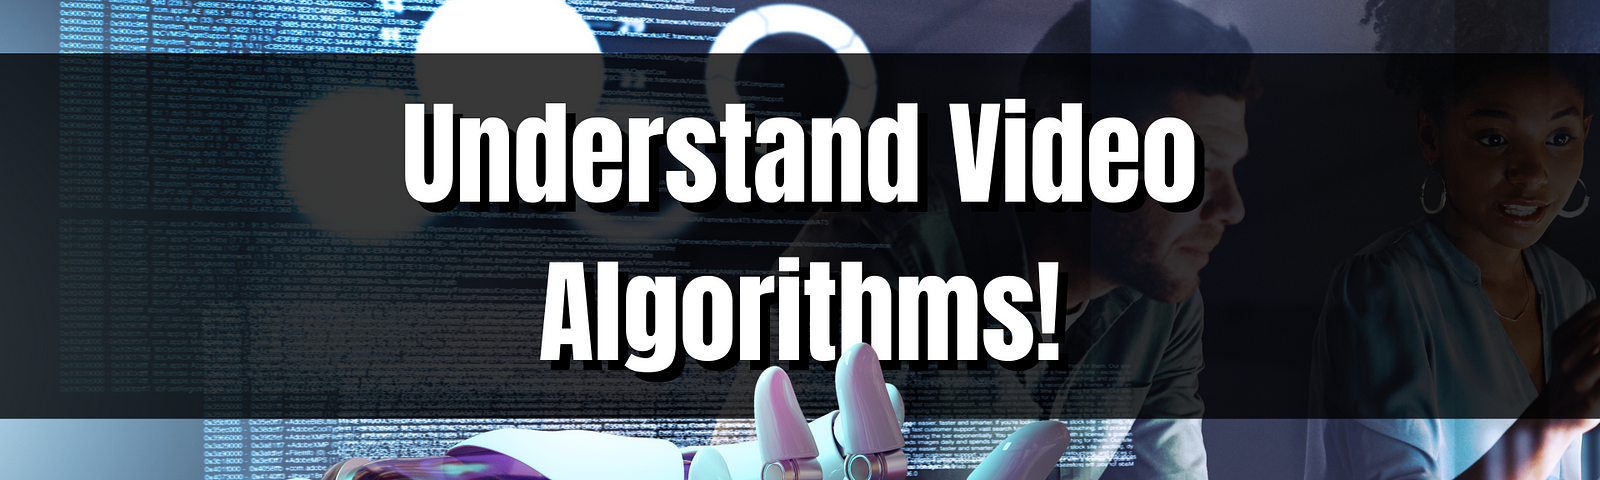 a guide through video algorithms on all major video sites